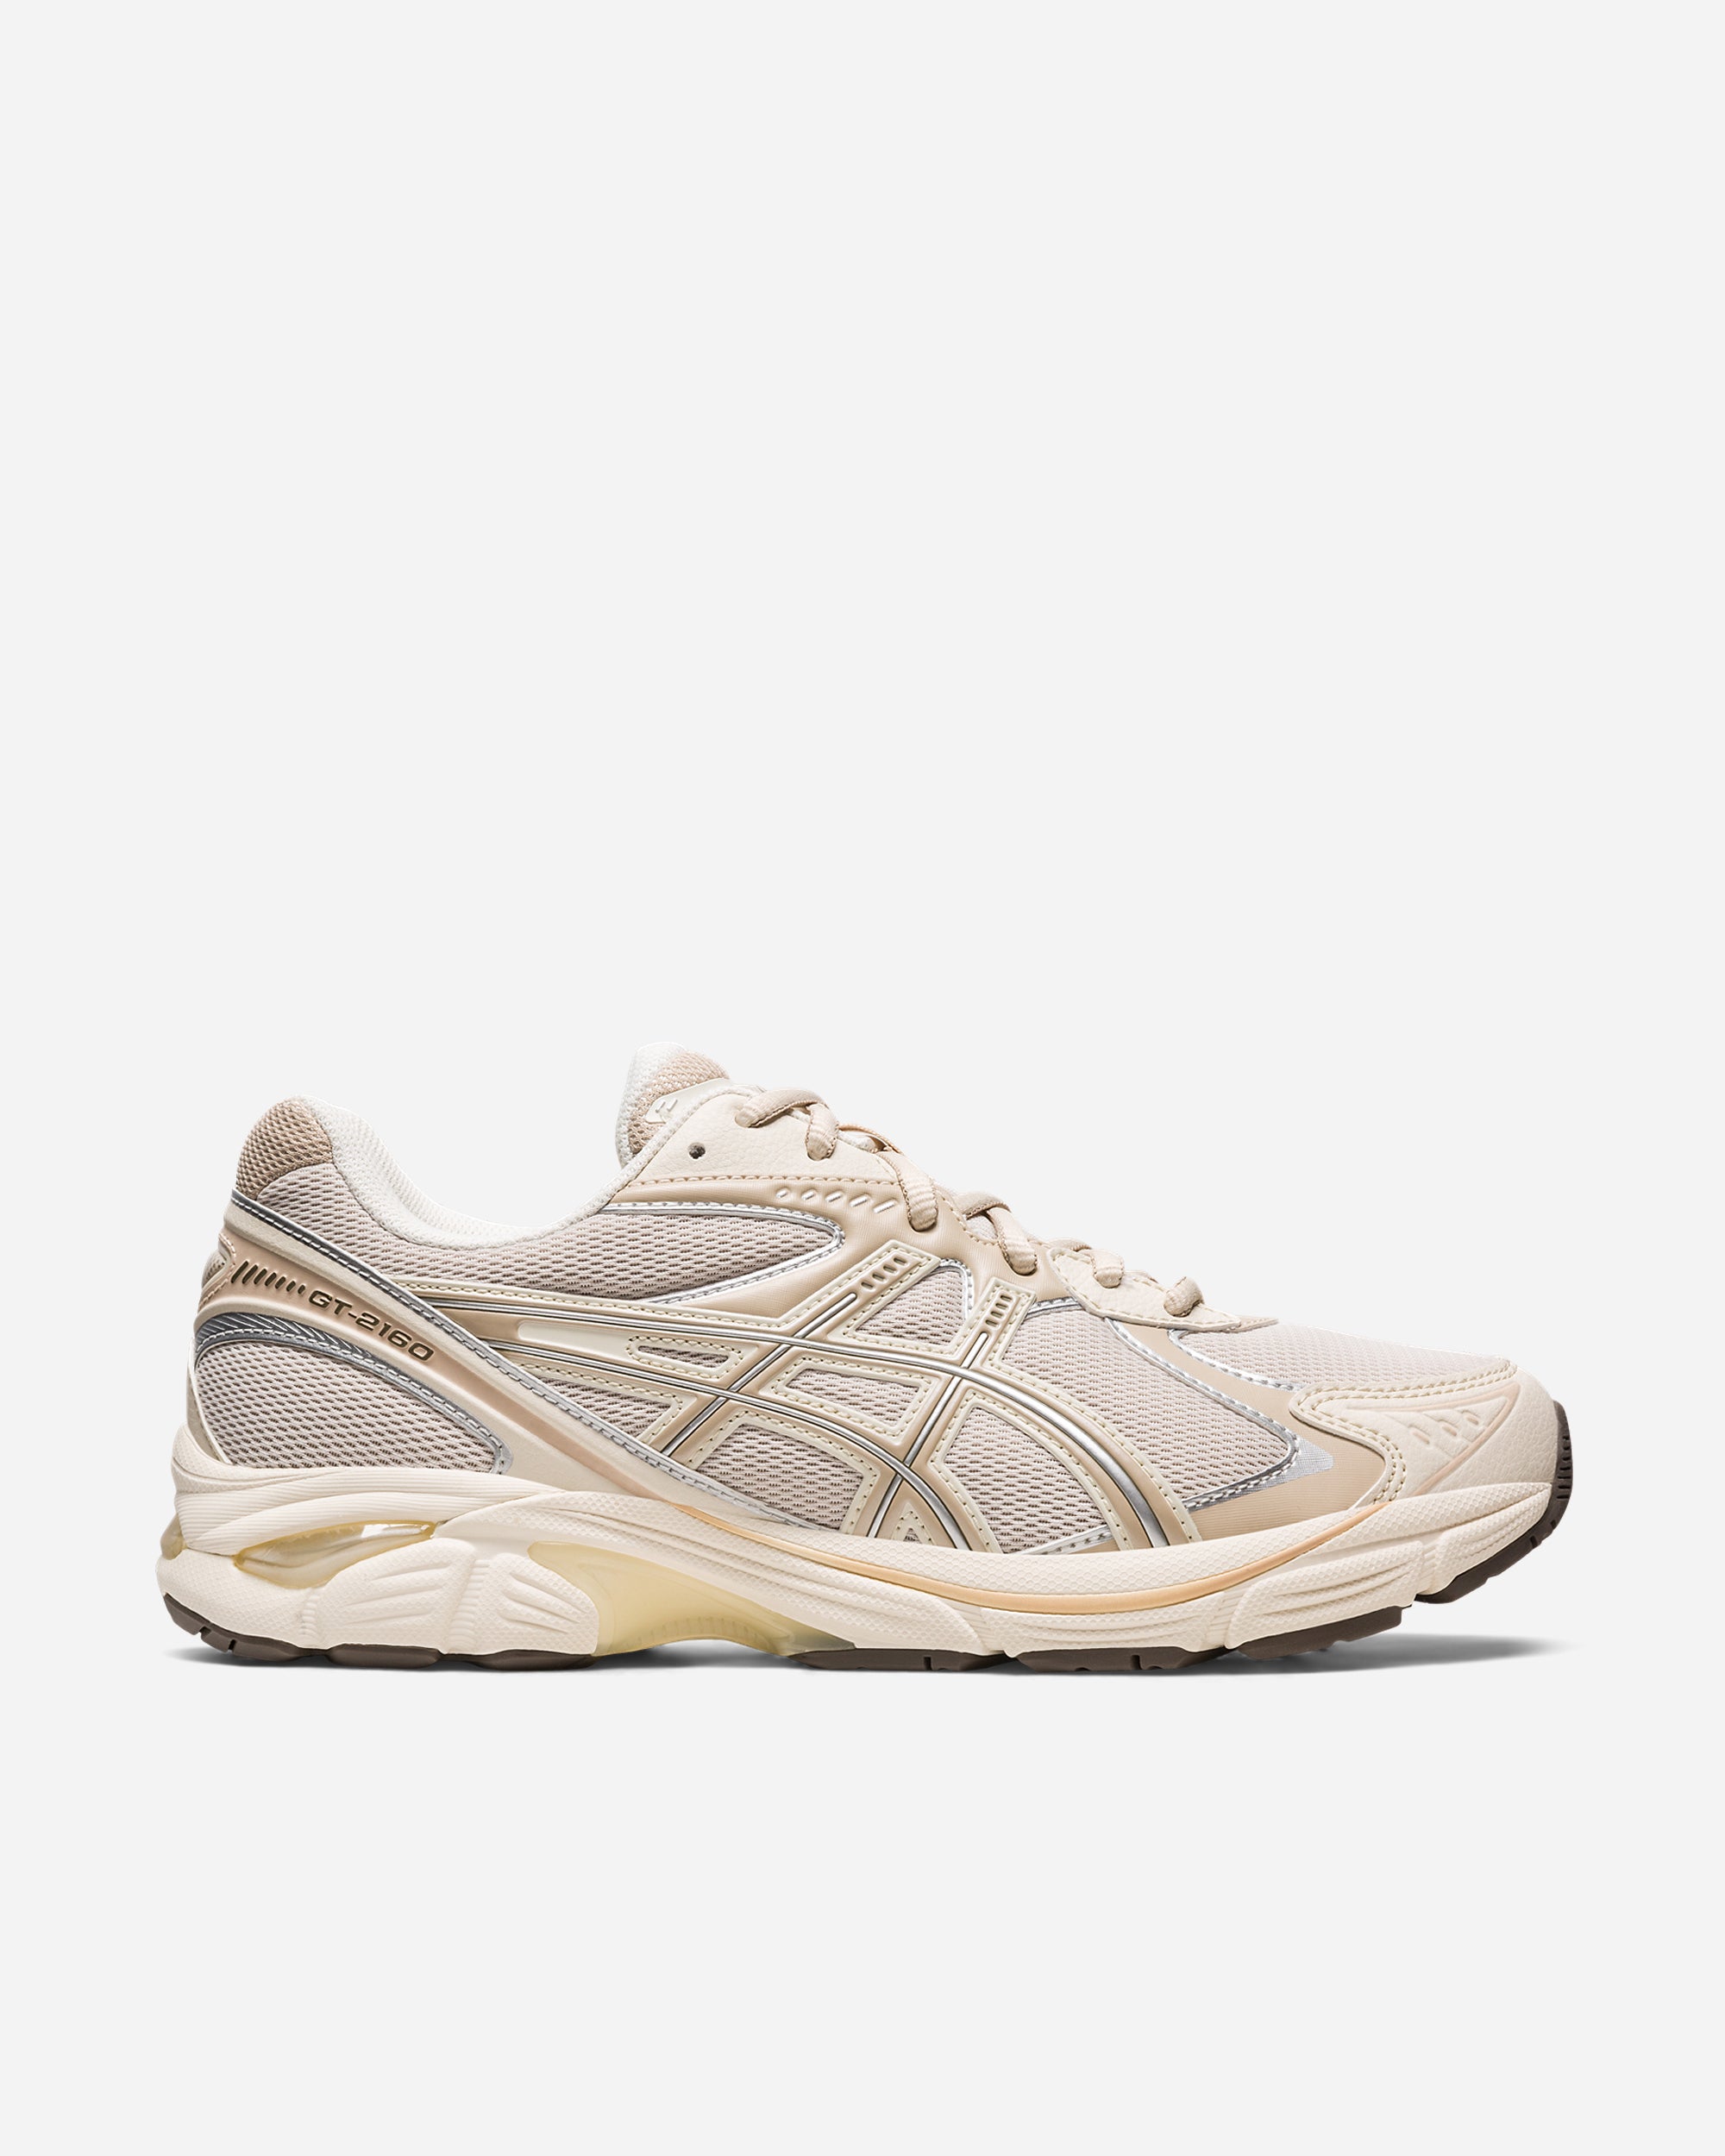 Asics GT-2160 OATMEAL/SIMPLY TAUPE 1203A320-250